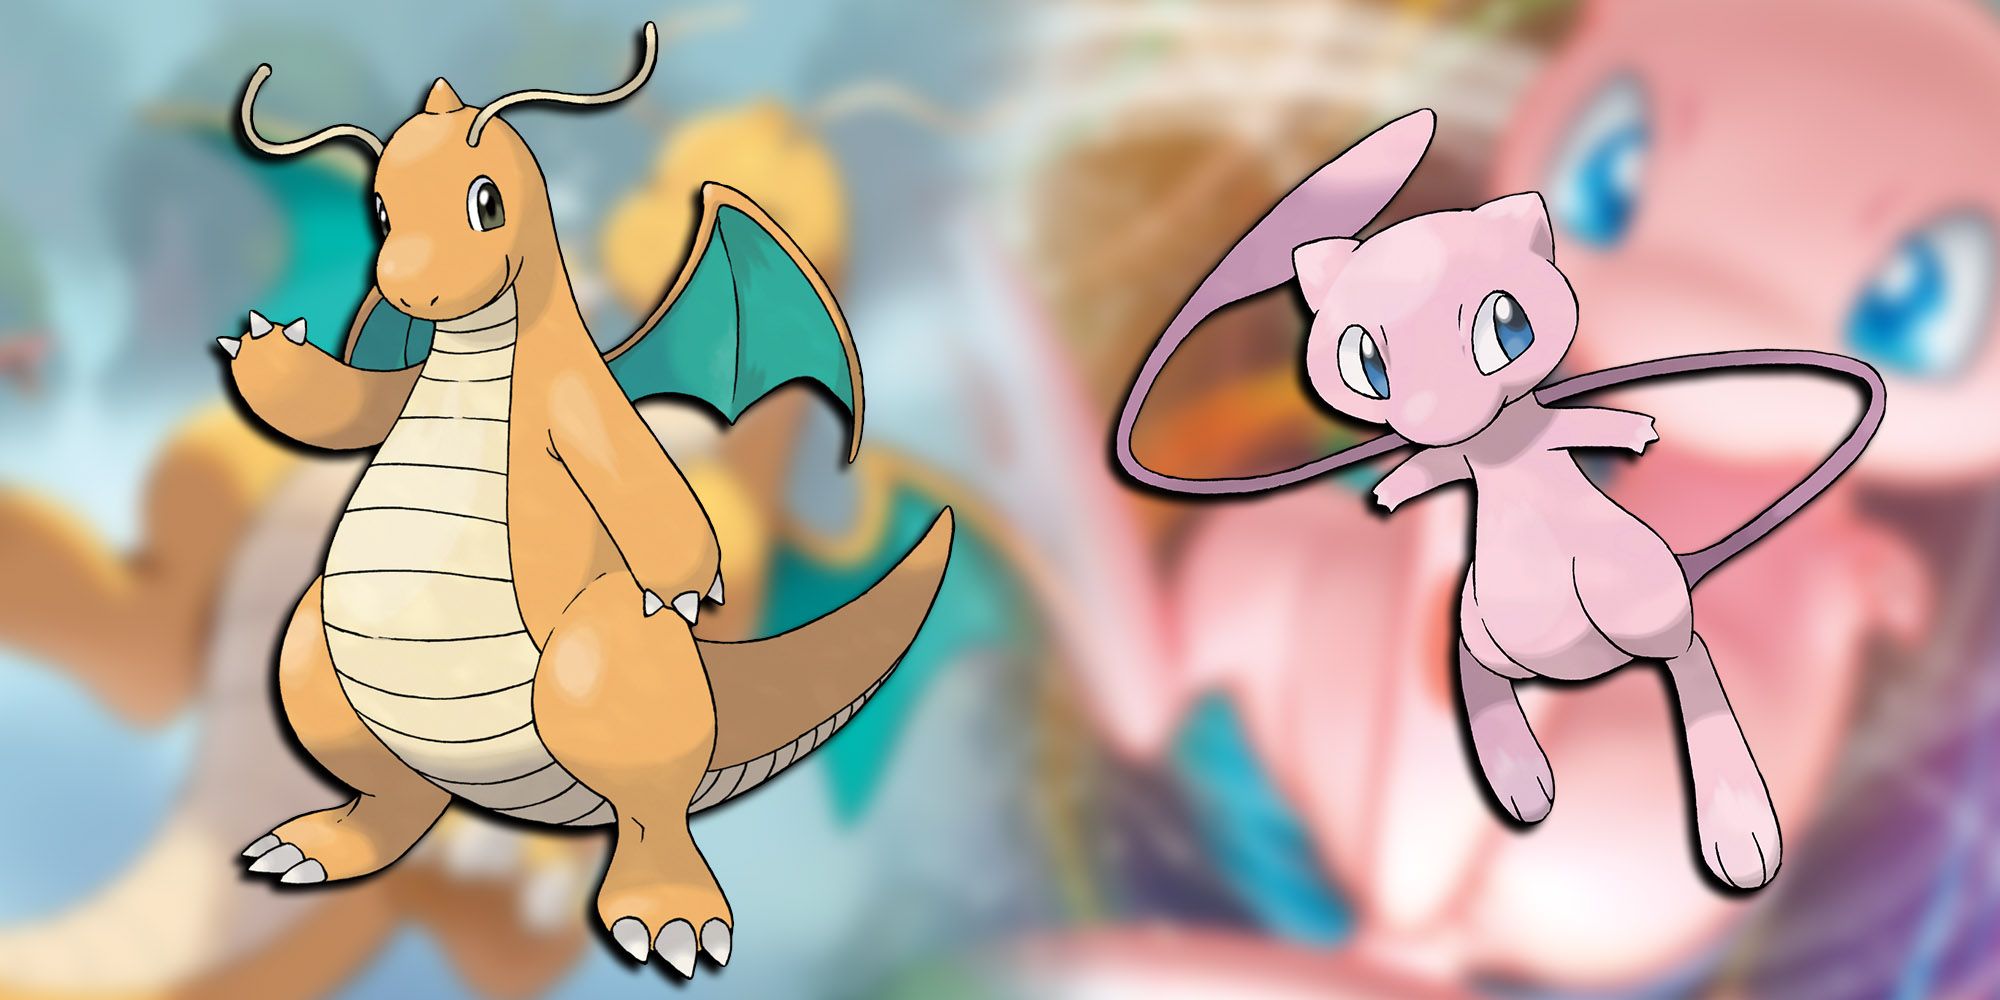 Pokemon - Dragonite And Mew Side By Side